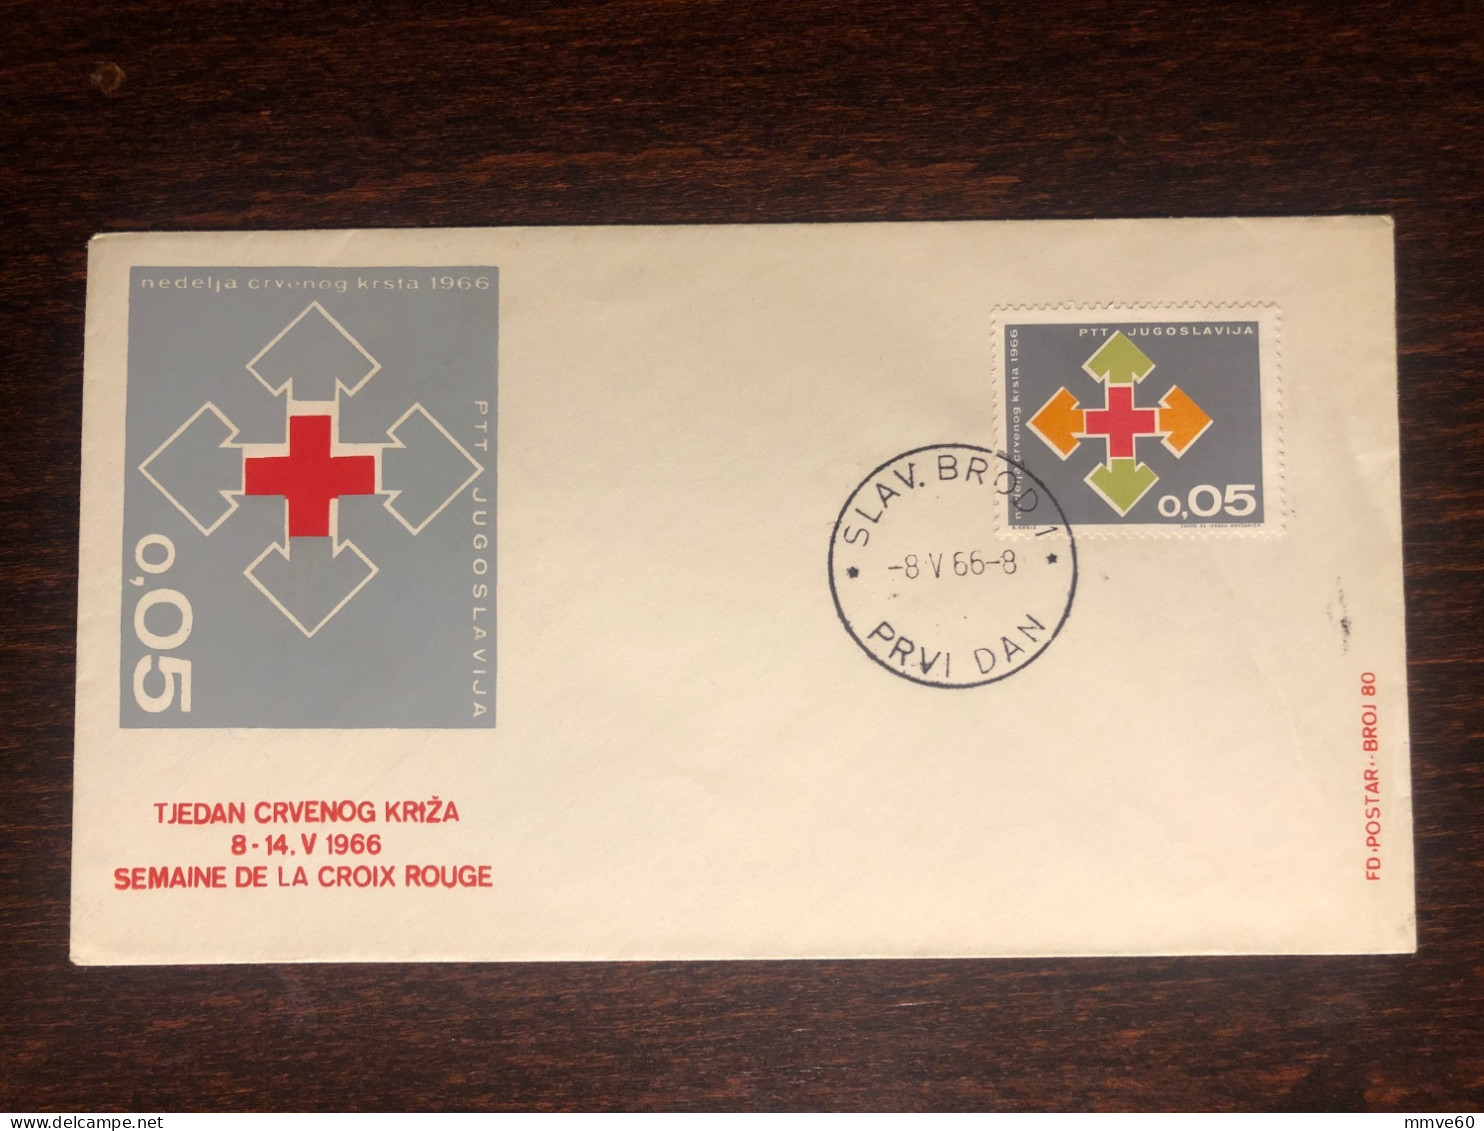 YUGOSLAVIA FDC COVER 1966 YEAR RED CROSS HEALTH MEDICINE STAMPS - FDC